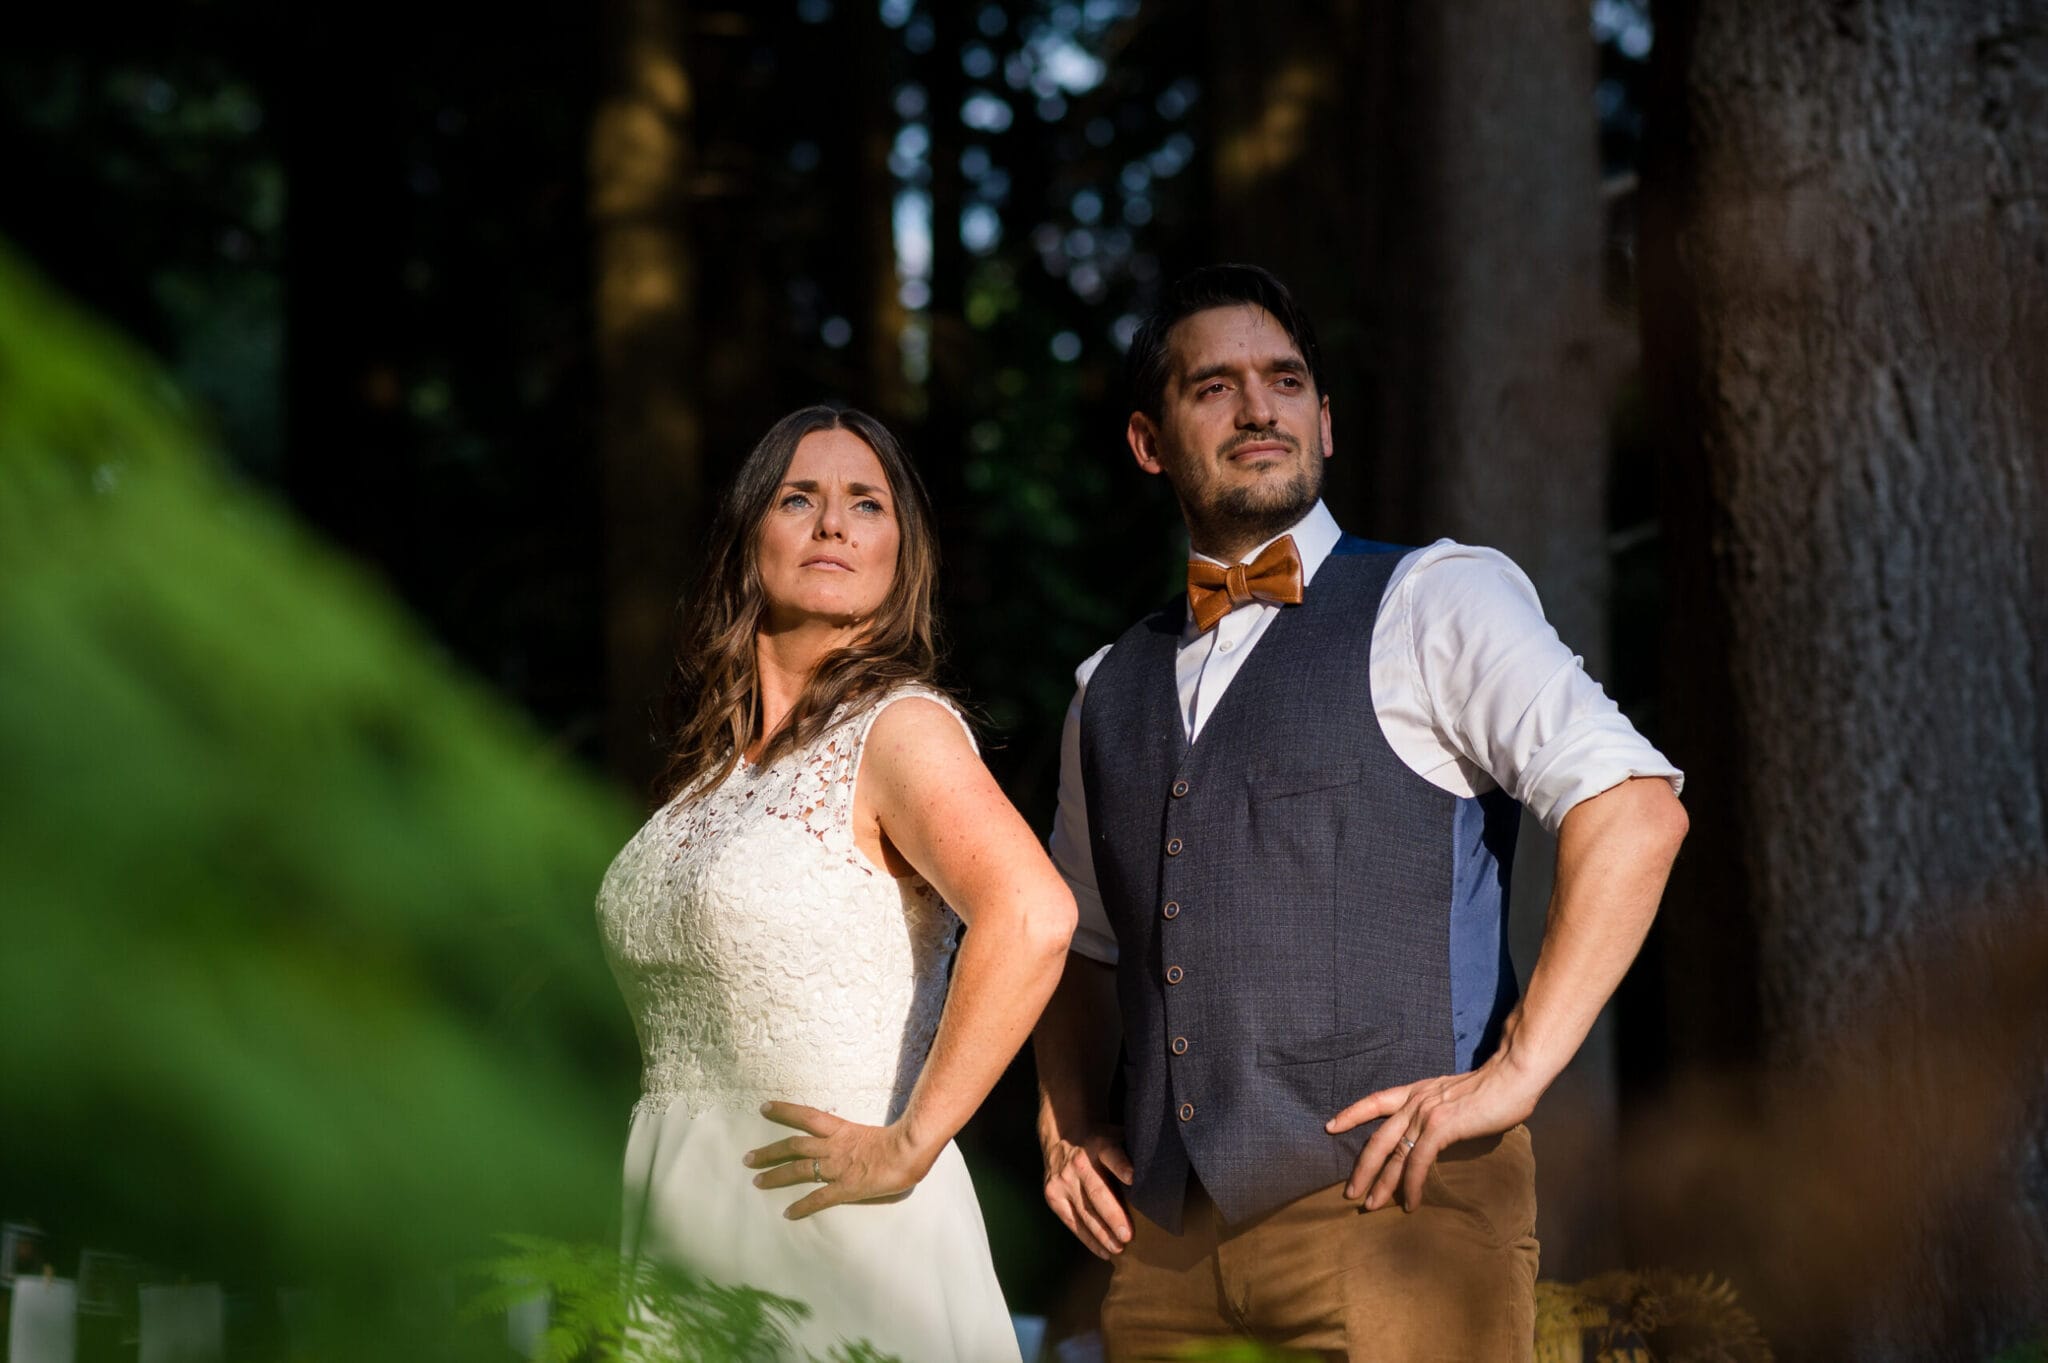 Album cover posing at Weddings in the Wood near Burley in the New Forest